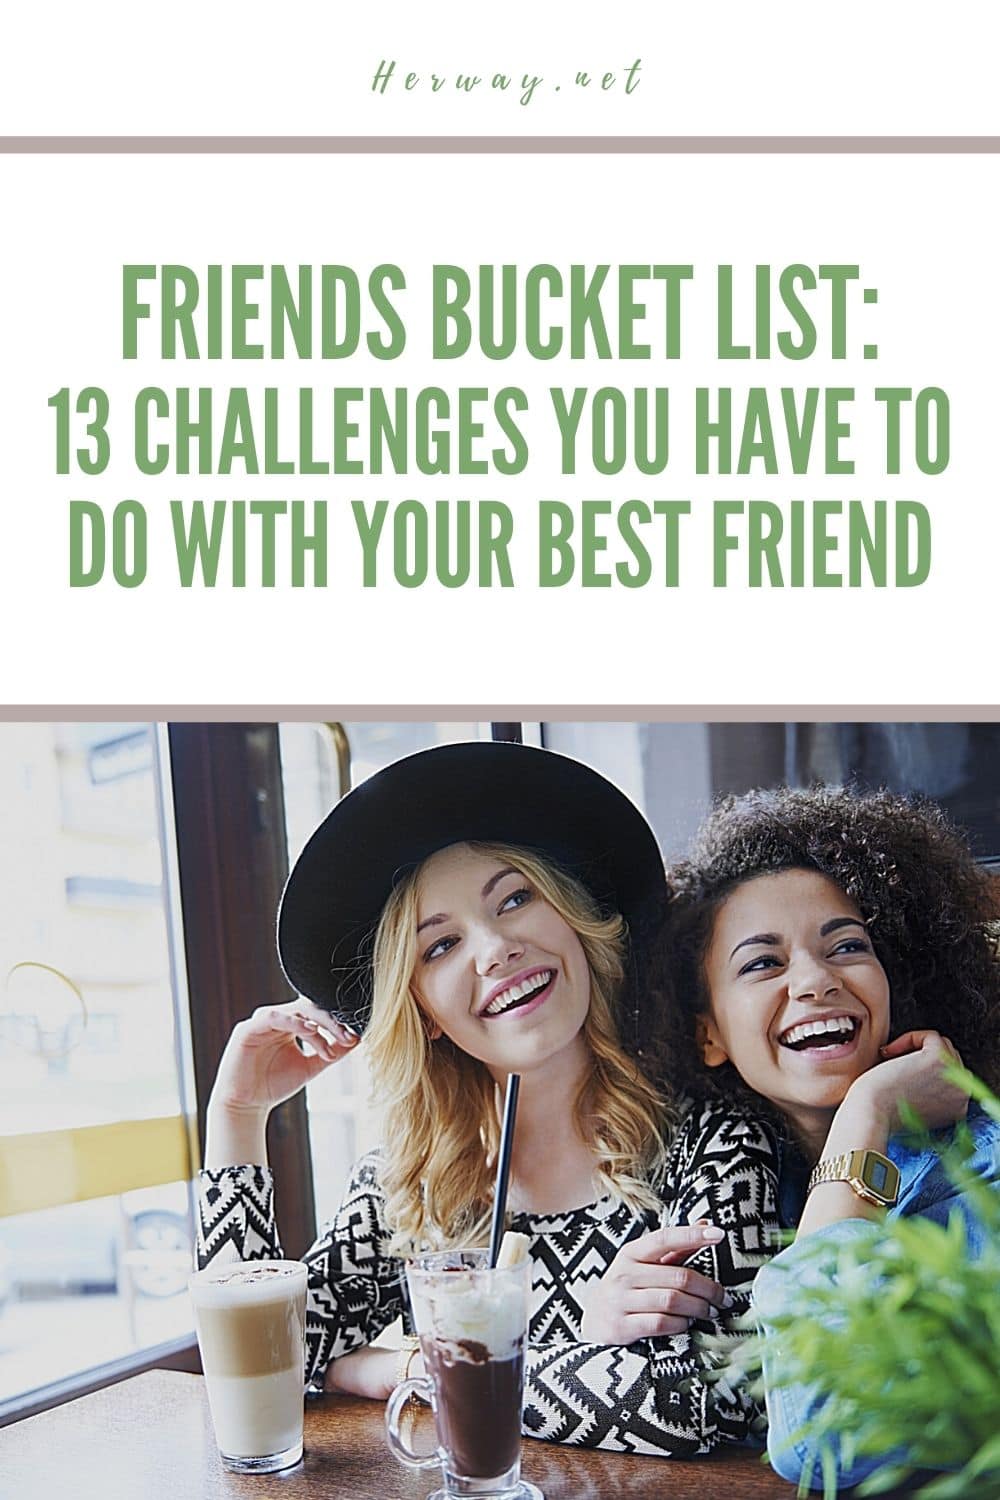 Friends Bucket List: 13 Challenges You Have To Do With Your Best Friend